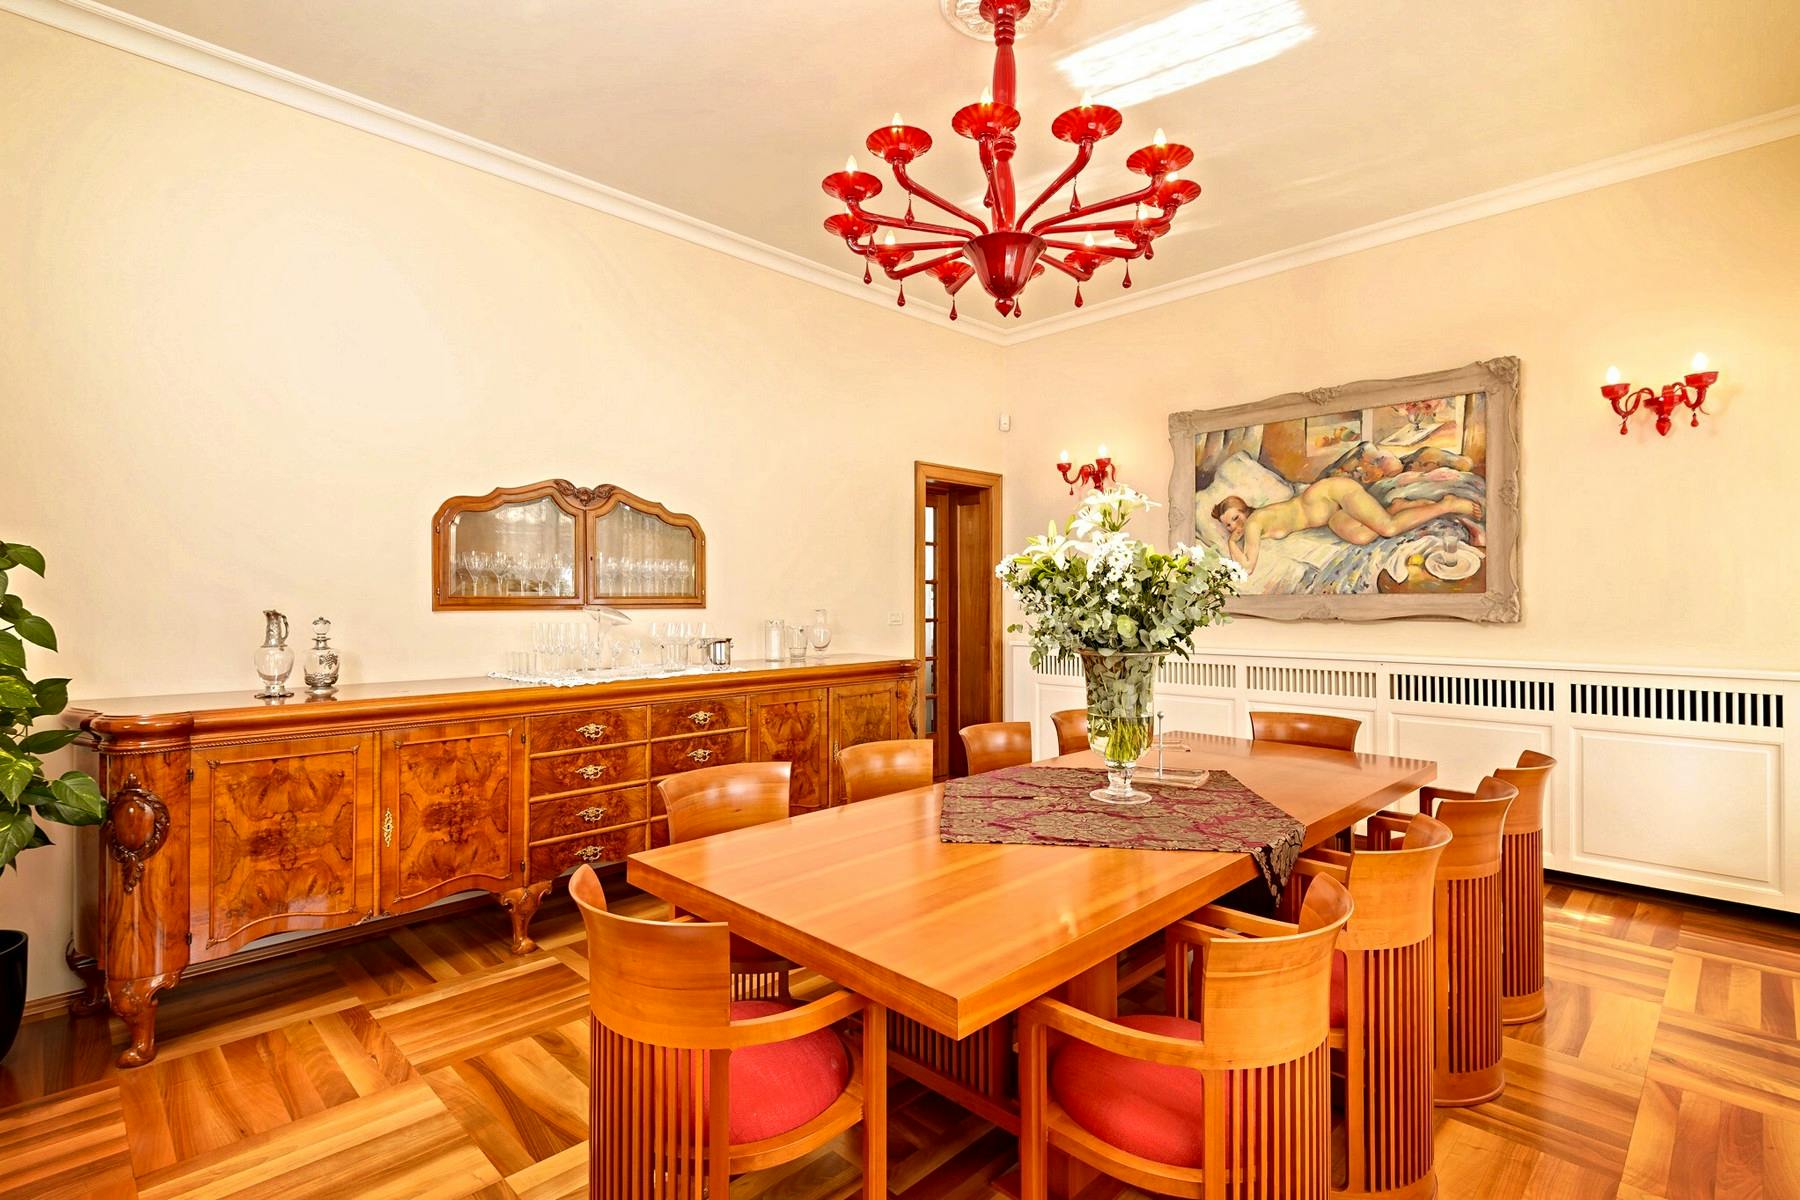 Dining room with classic wooden furniture 